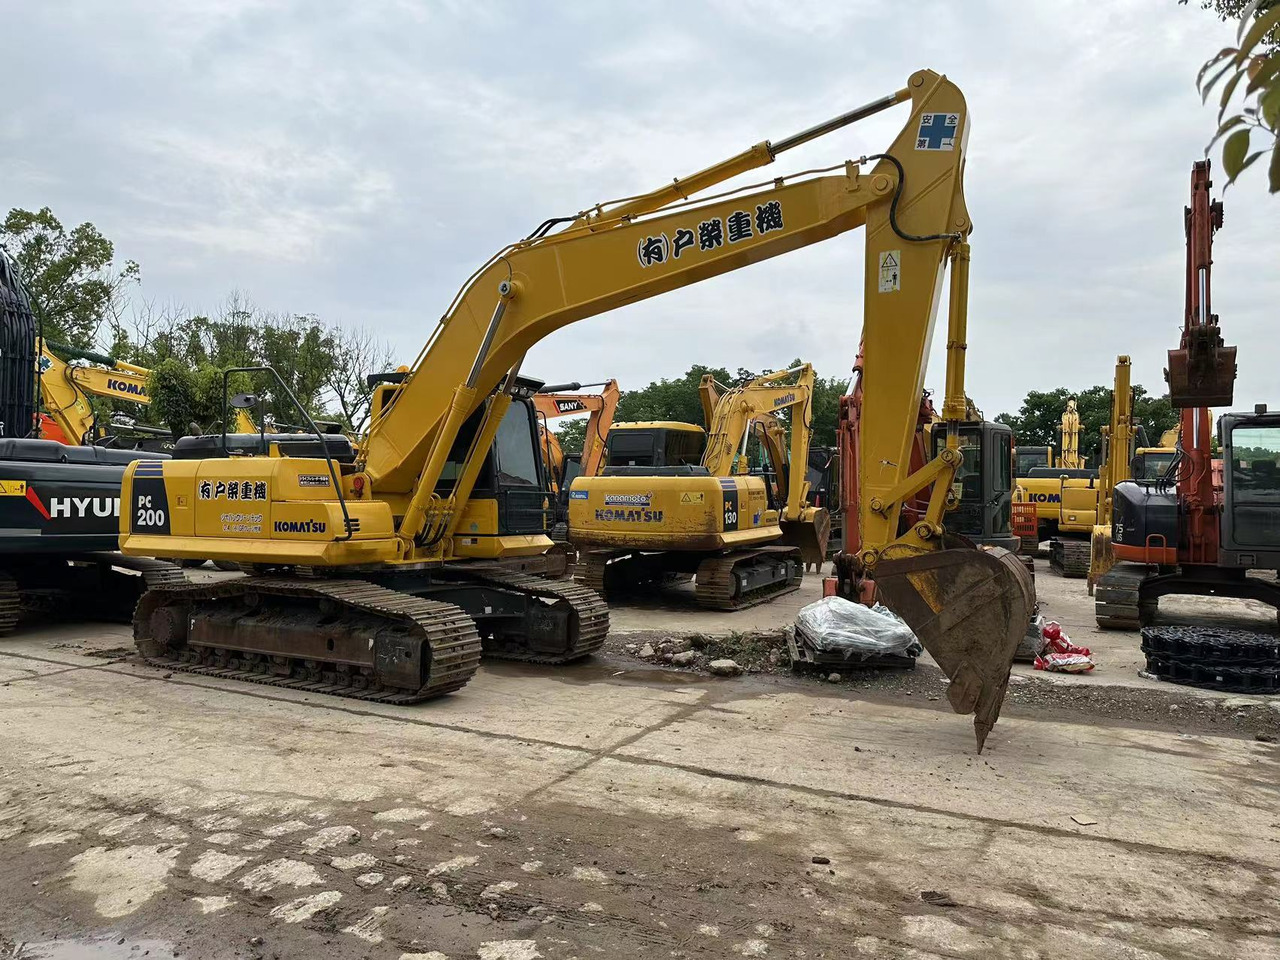 Kettenbagger High quality Good Performance KOMATSU PC200-8N1 with original design and strong power low working hours good condition on sale: das Bild 6